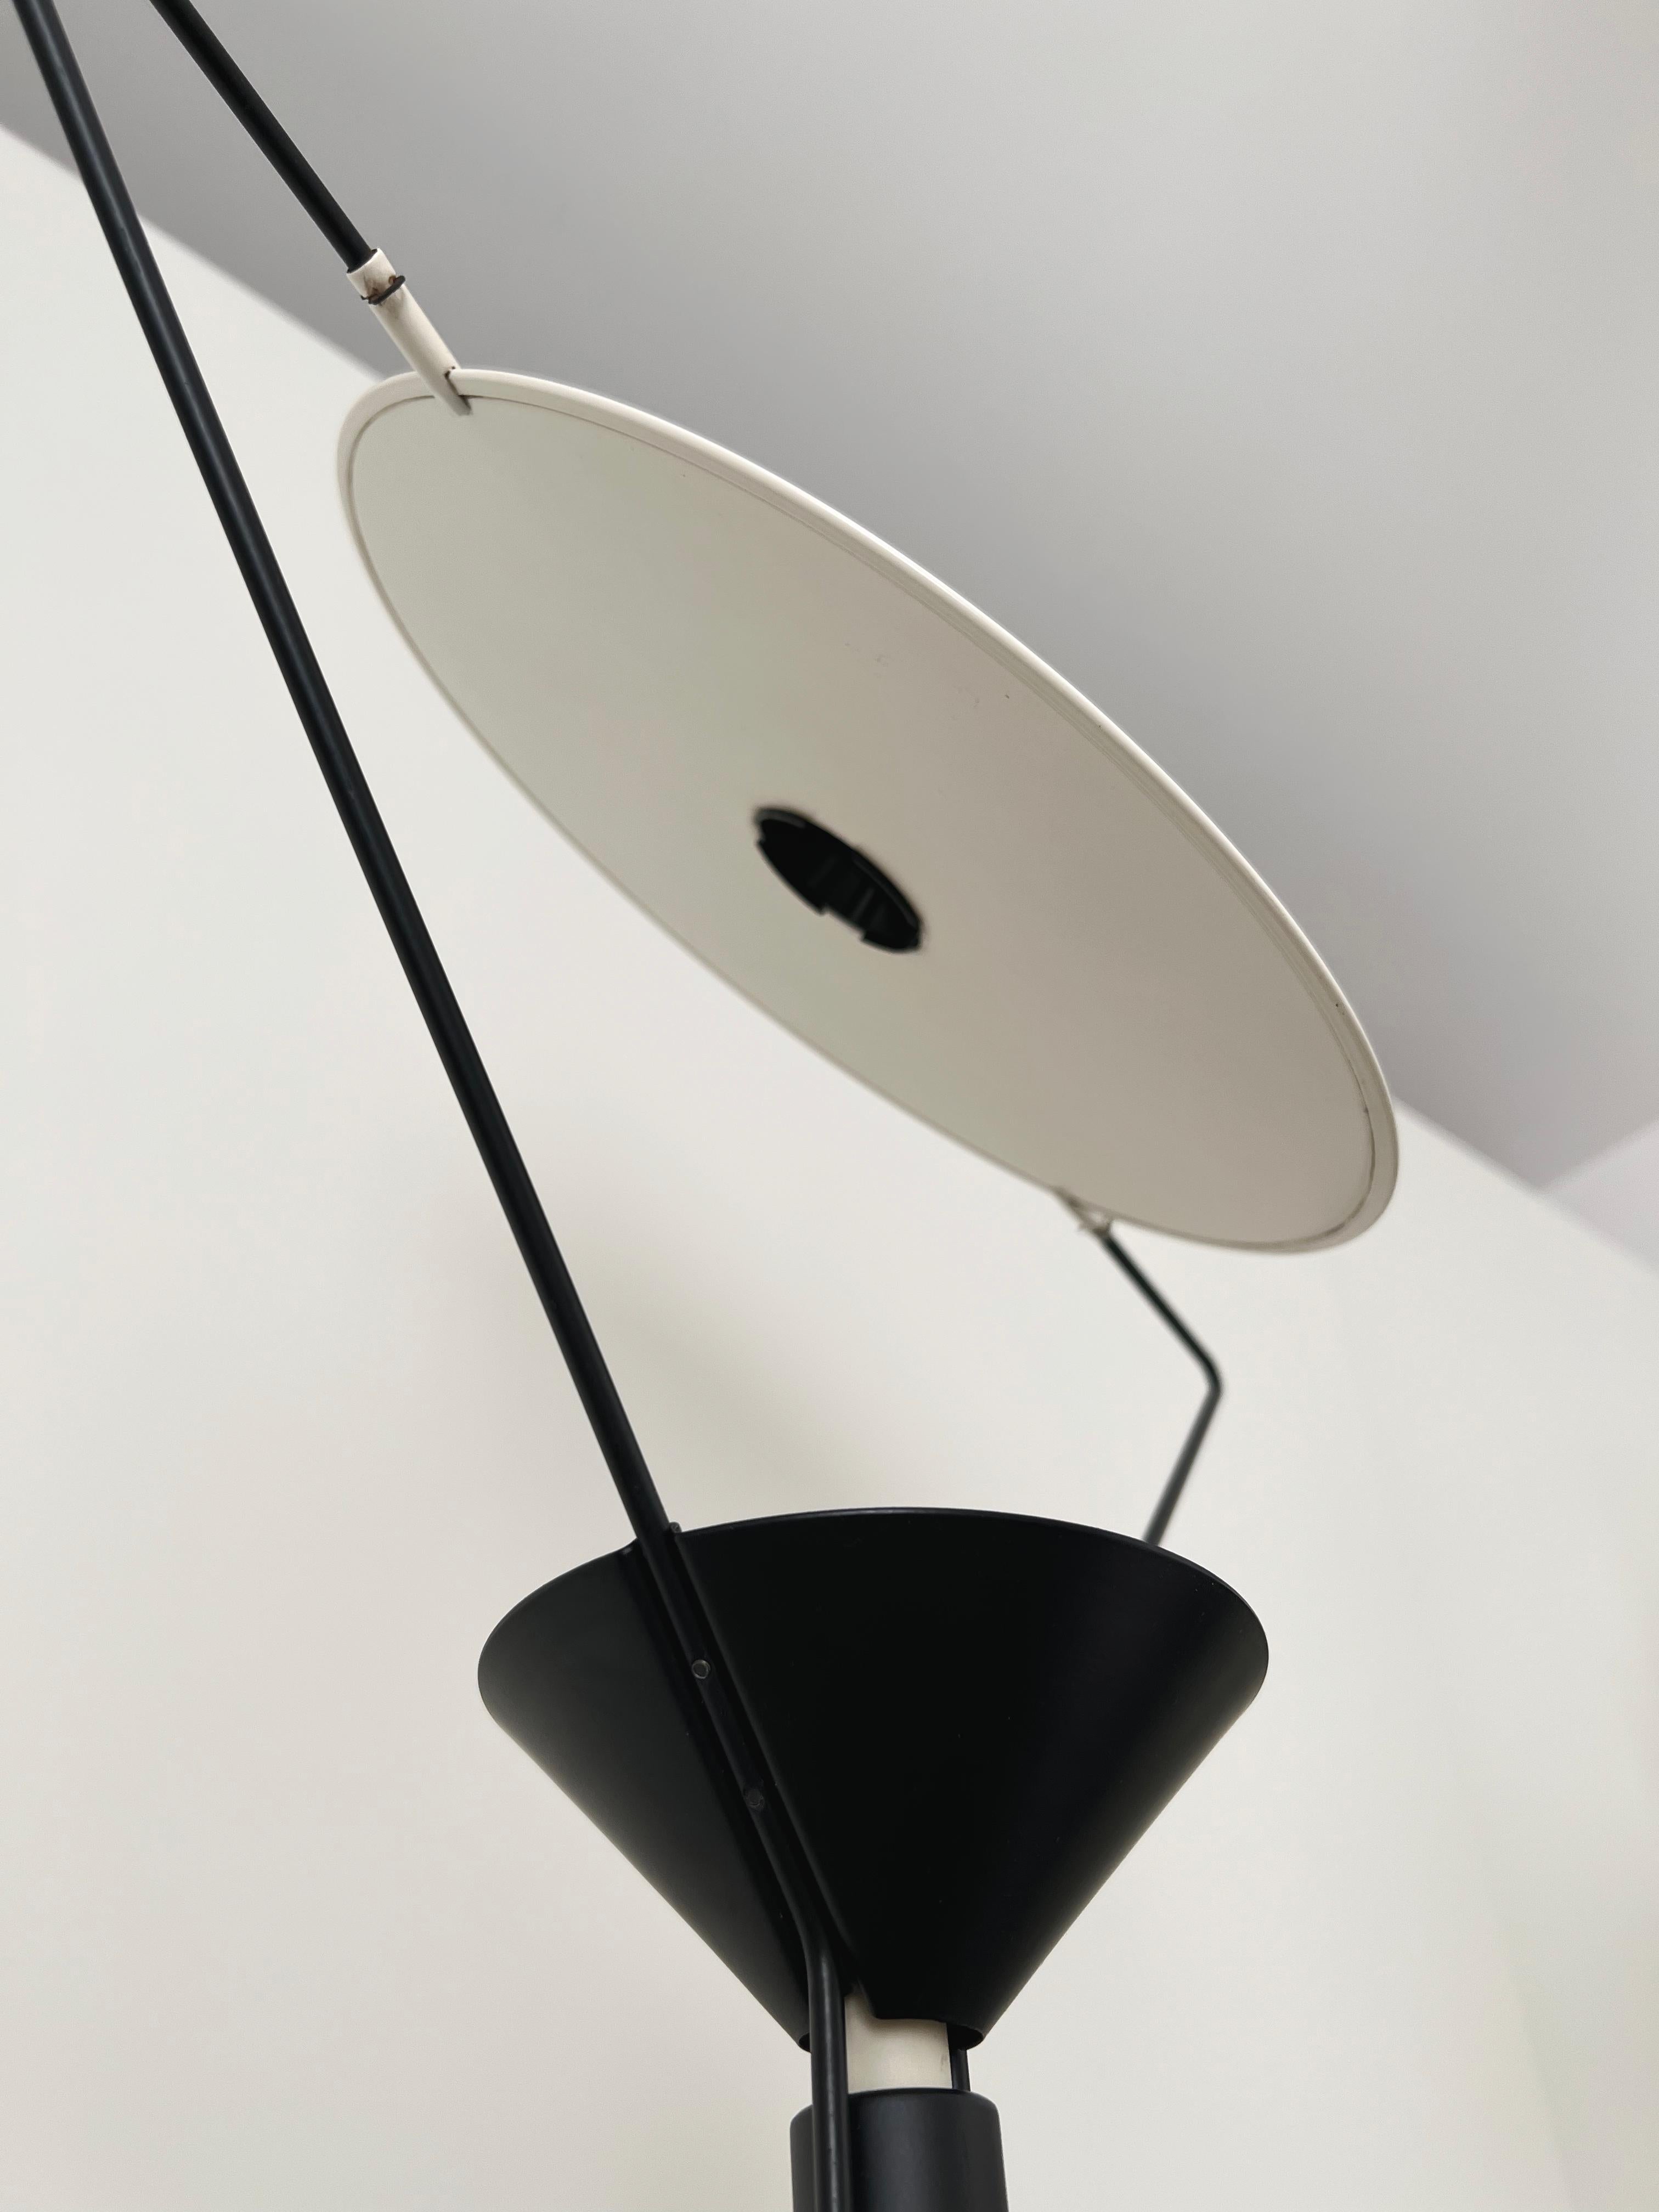 Late 20th Century Polifemo Floor Lamp by Carlo Forcolini for Artemide, Italy For Sale